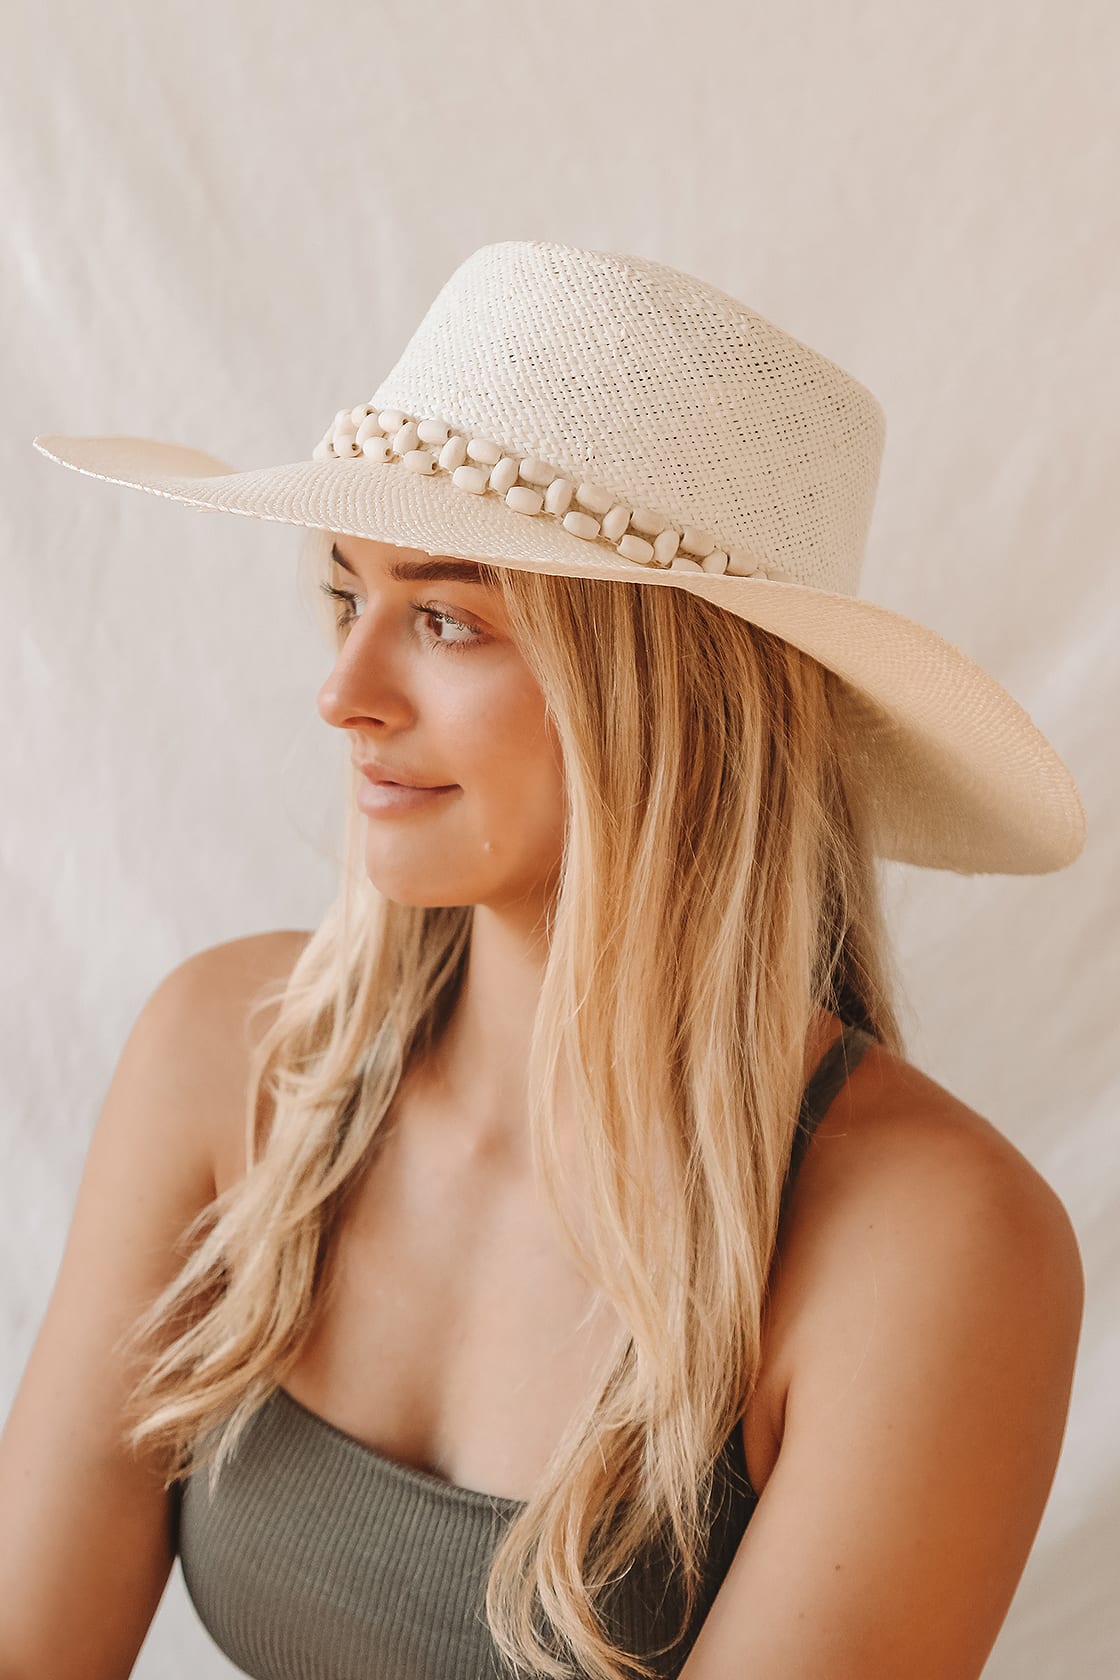 White Broad Brim Hat for Vacation in Greece